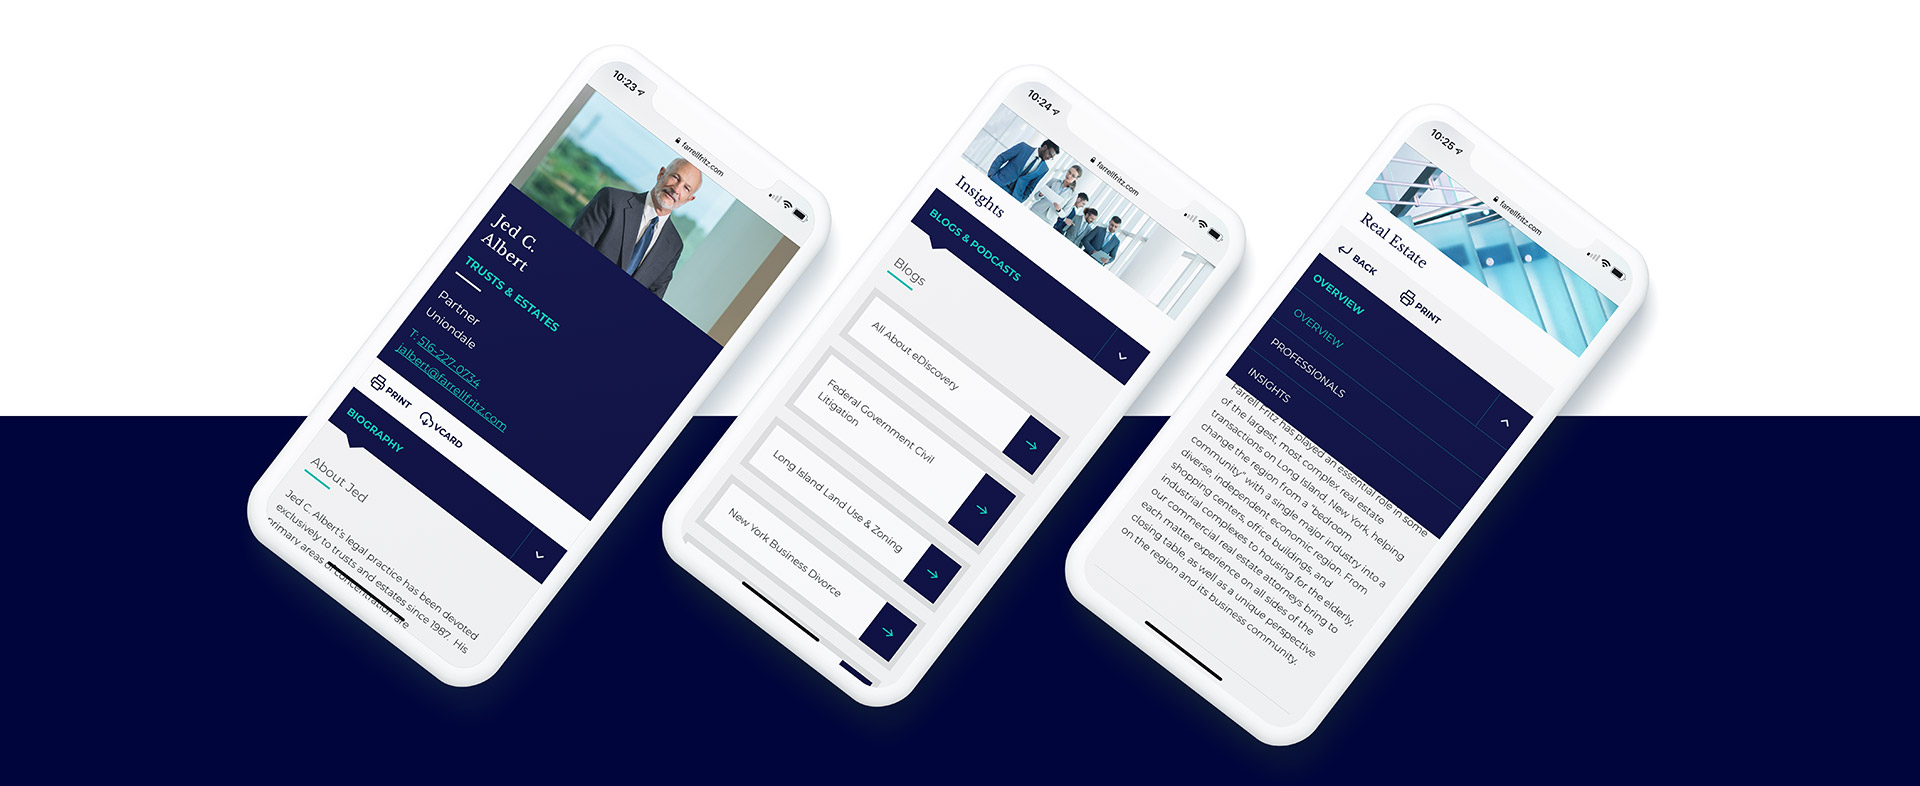 Three smartphones display different sections of a business app interface featuring a blue and white theme. The screens show a professional headshot with contact details, a list of business associates, and a detailed text document from Farrell Fritz, respectively.